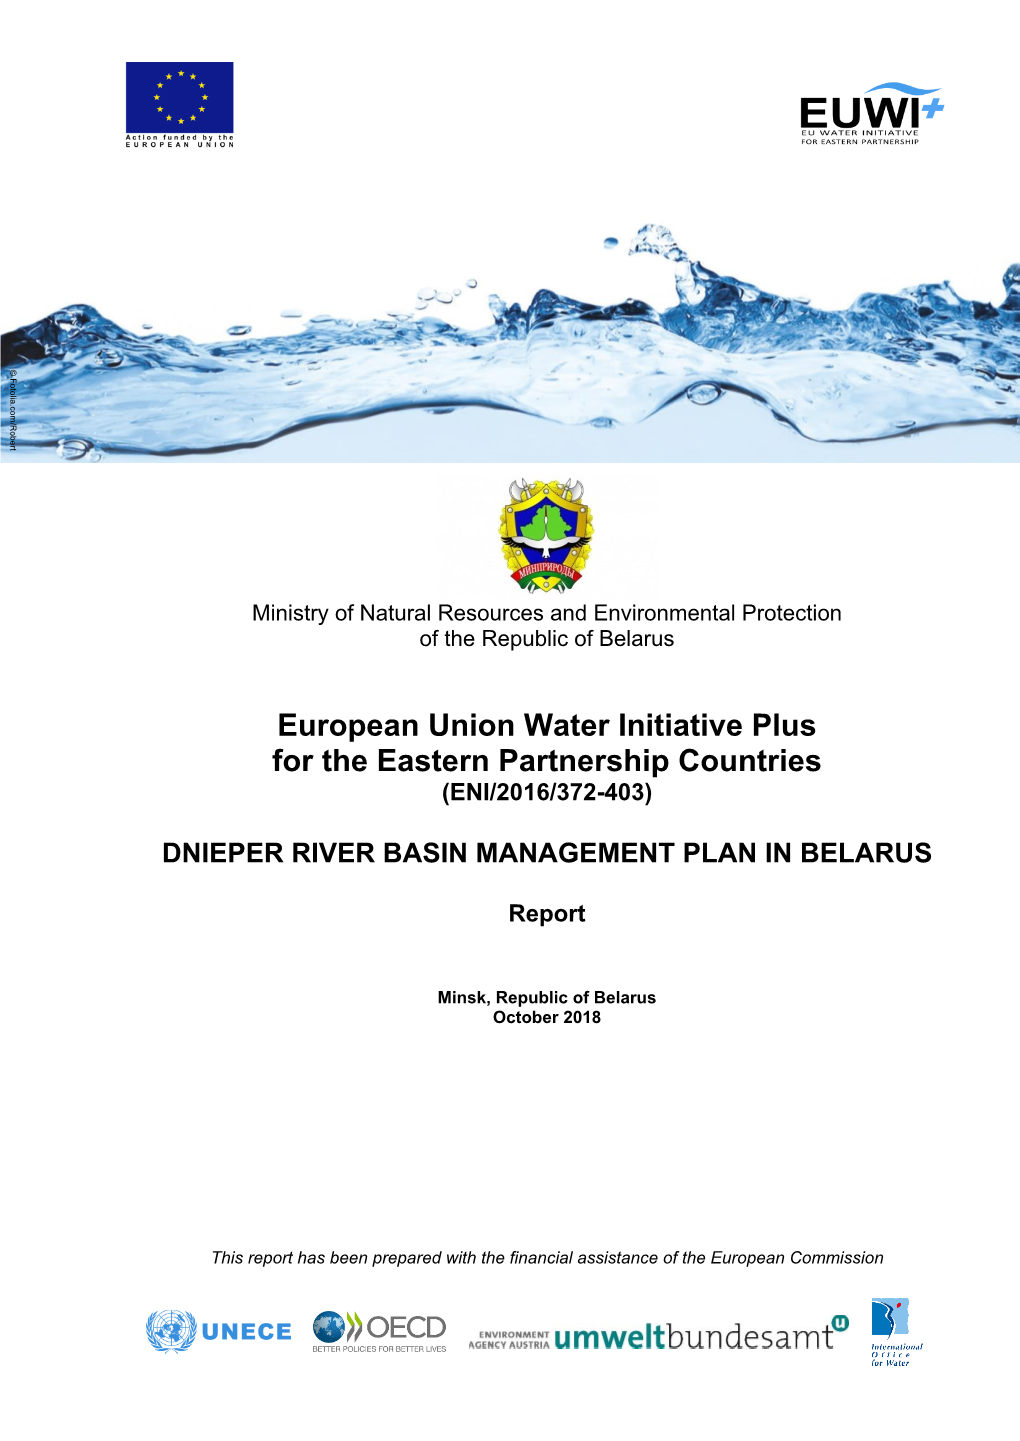 European Union Water Initiative Plus for the Eastern Partnership Countries (ENI/2016/372-403)